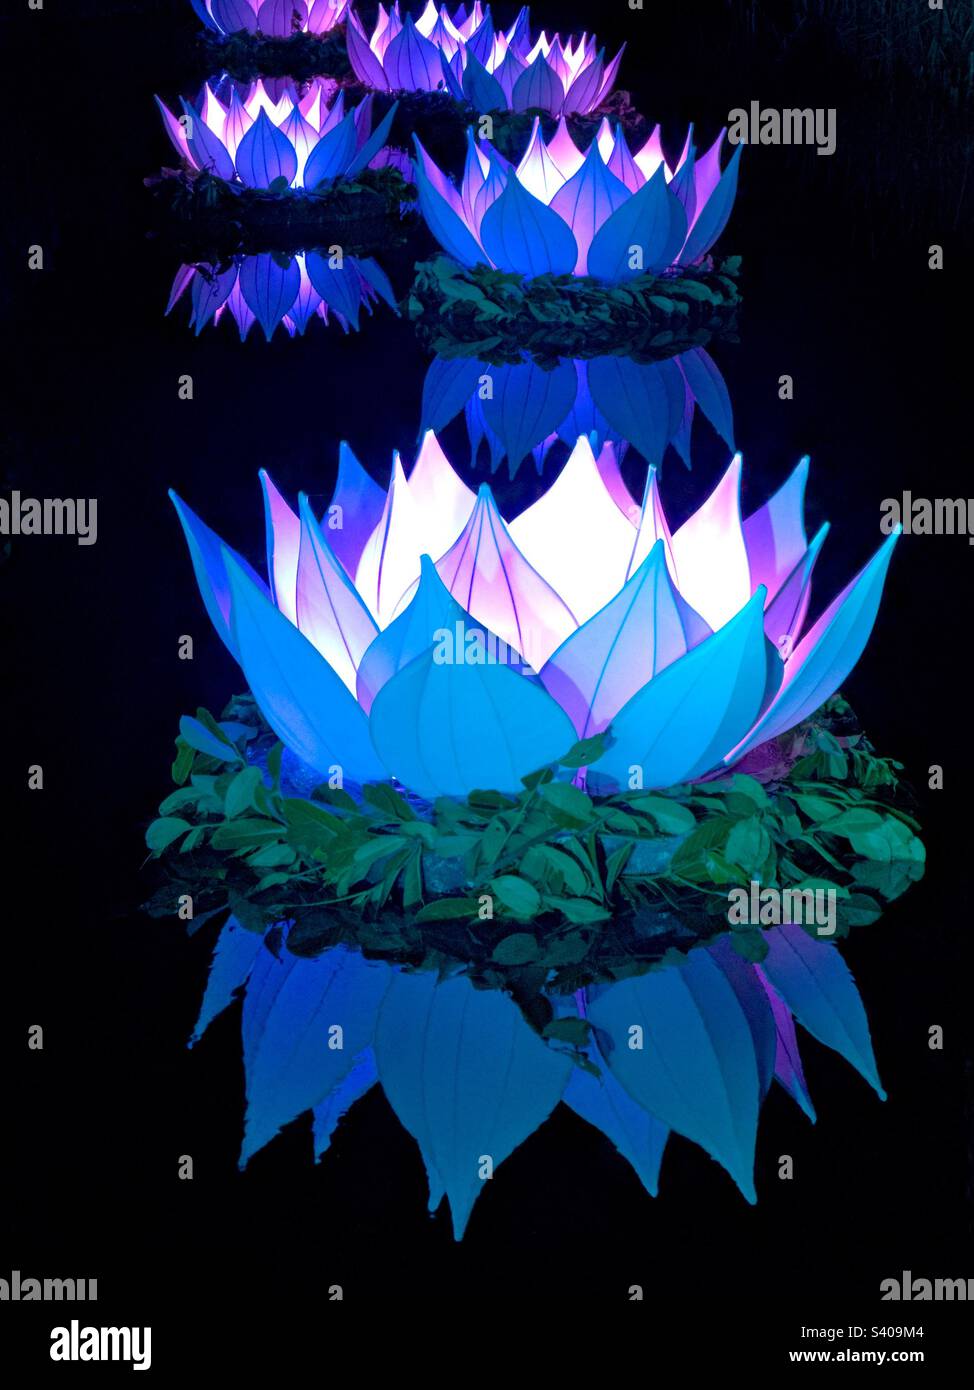 Illuminated lily shaped decorations floating on water. No people. Stock Photo